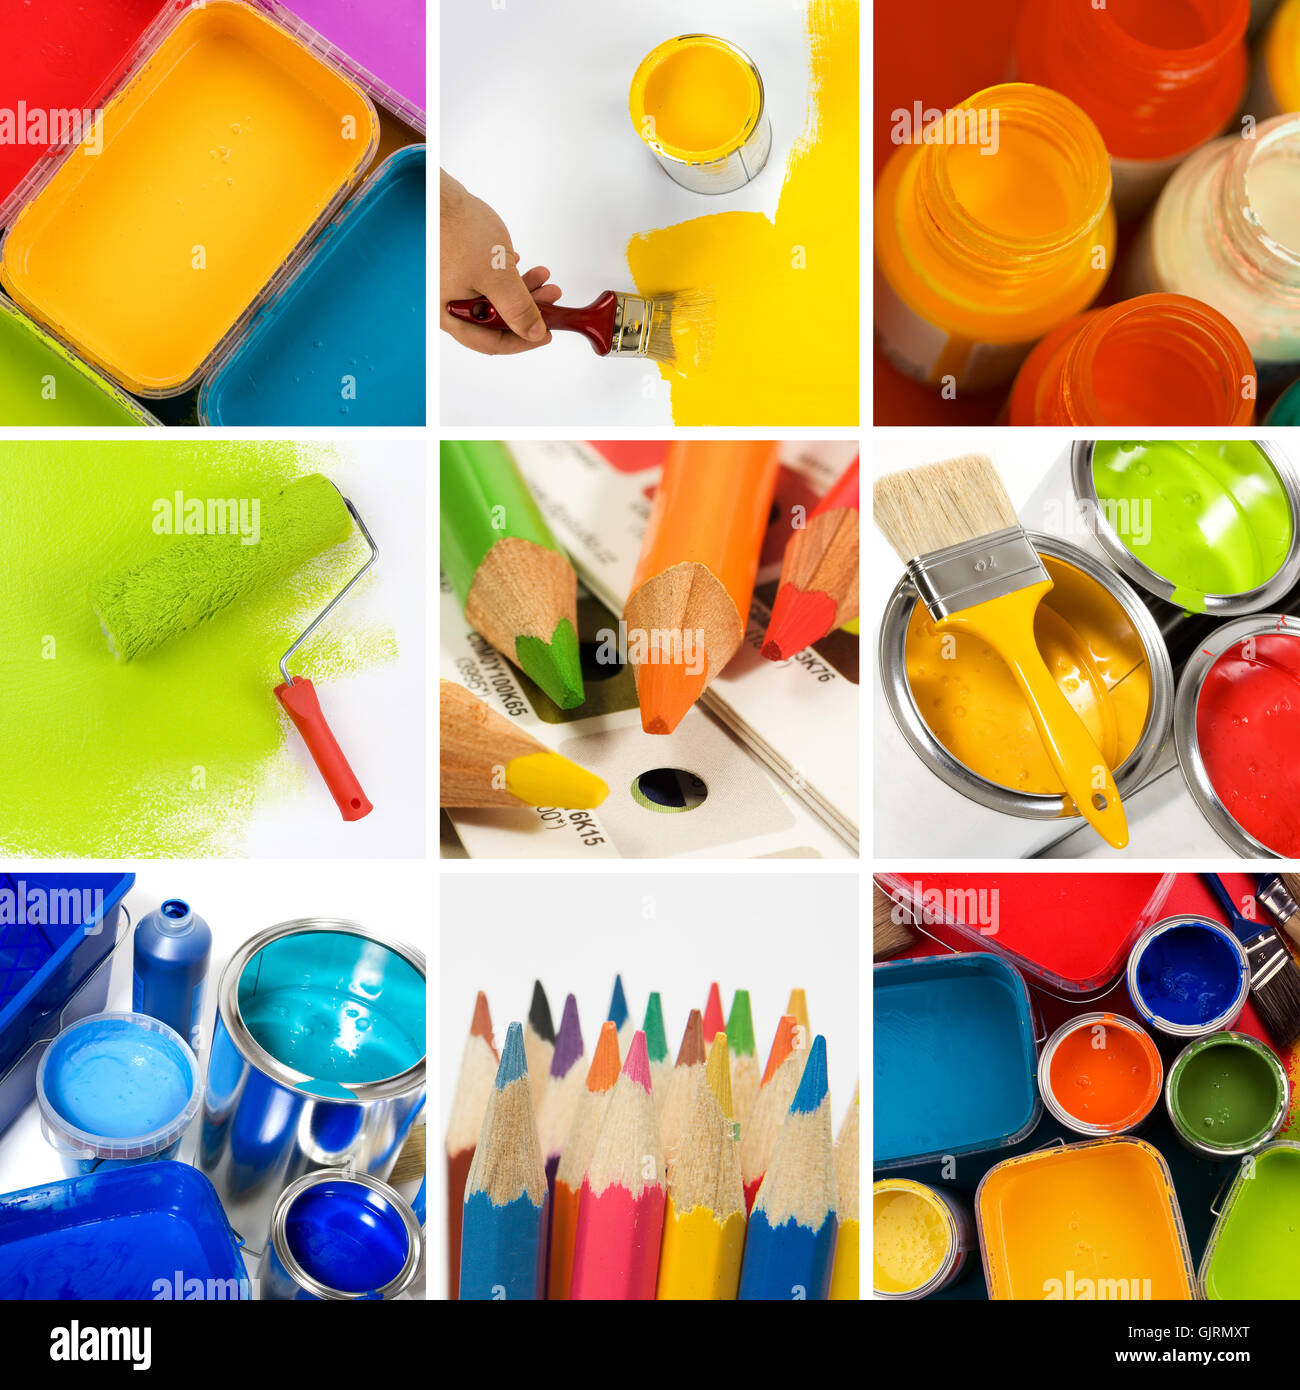 Collage of photos with professional artist's supplies Stock Photo - Alamy